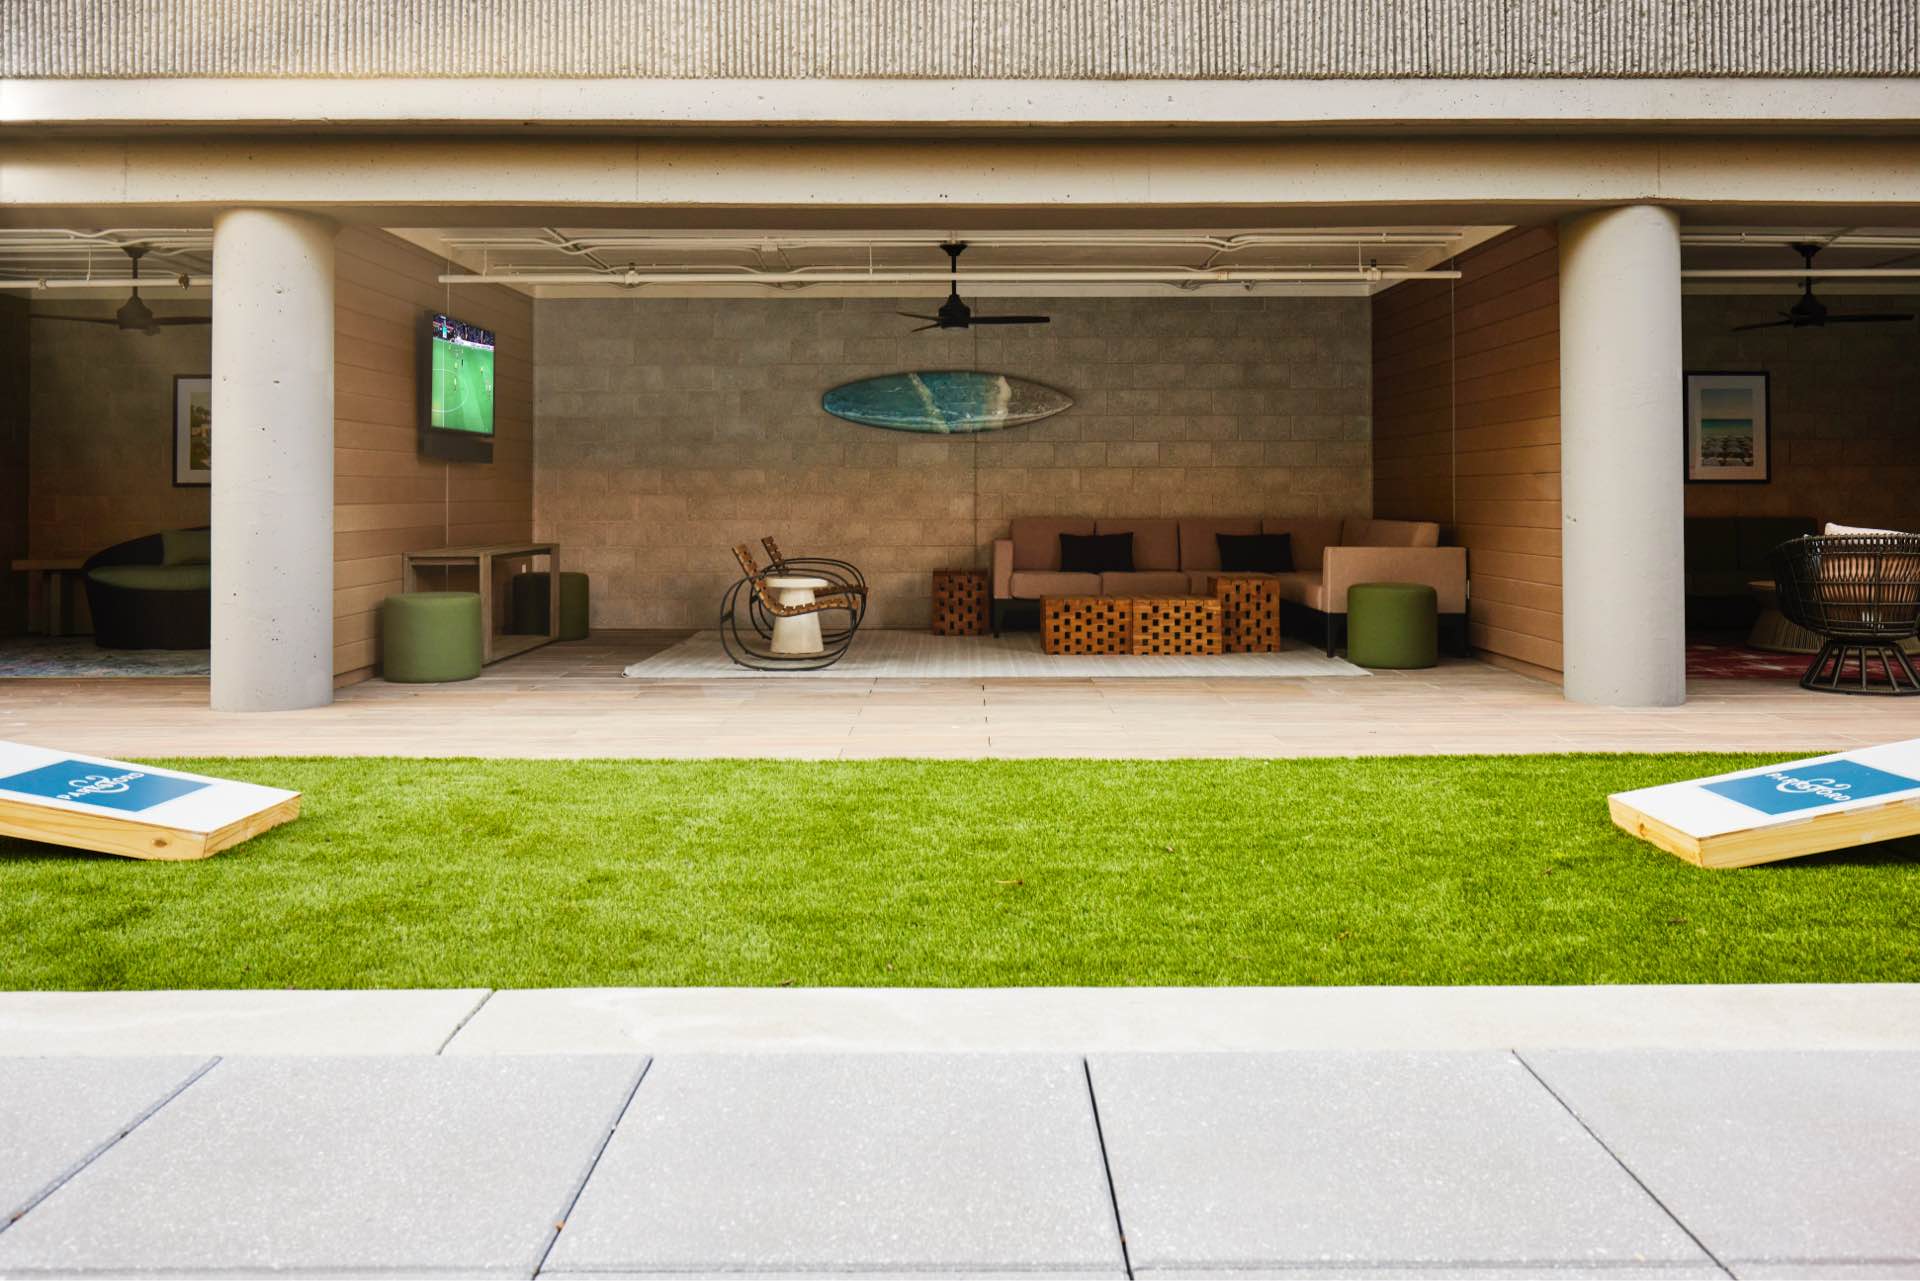 The yard allows for games galore on the bocce court